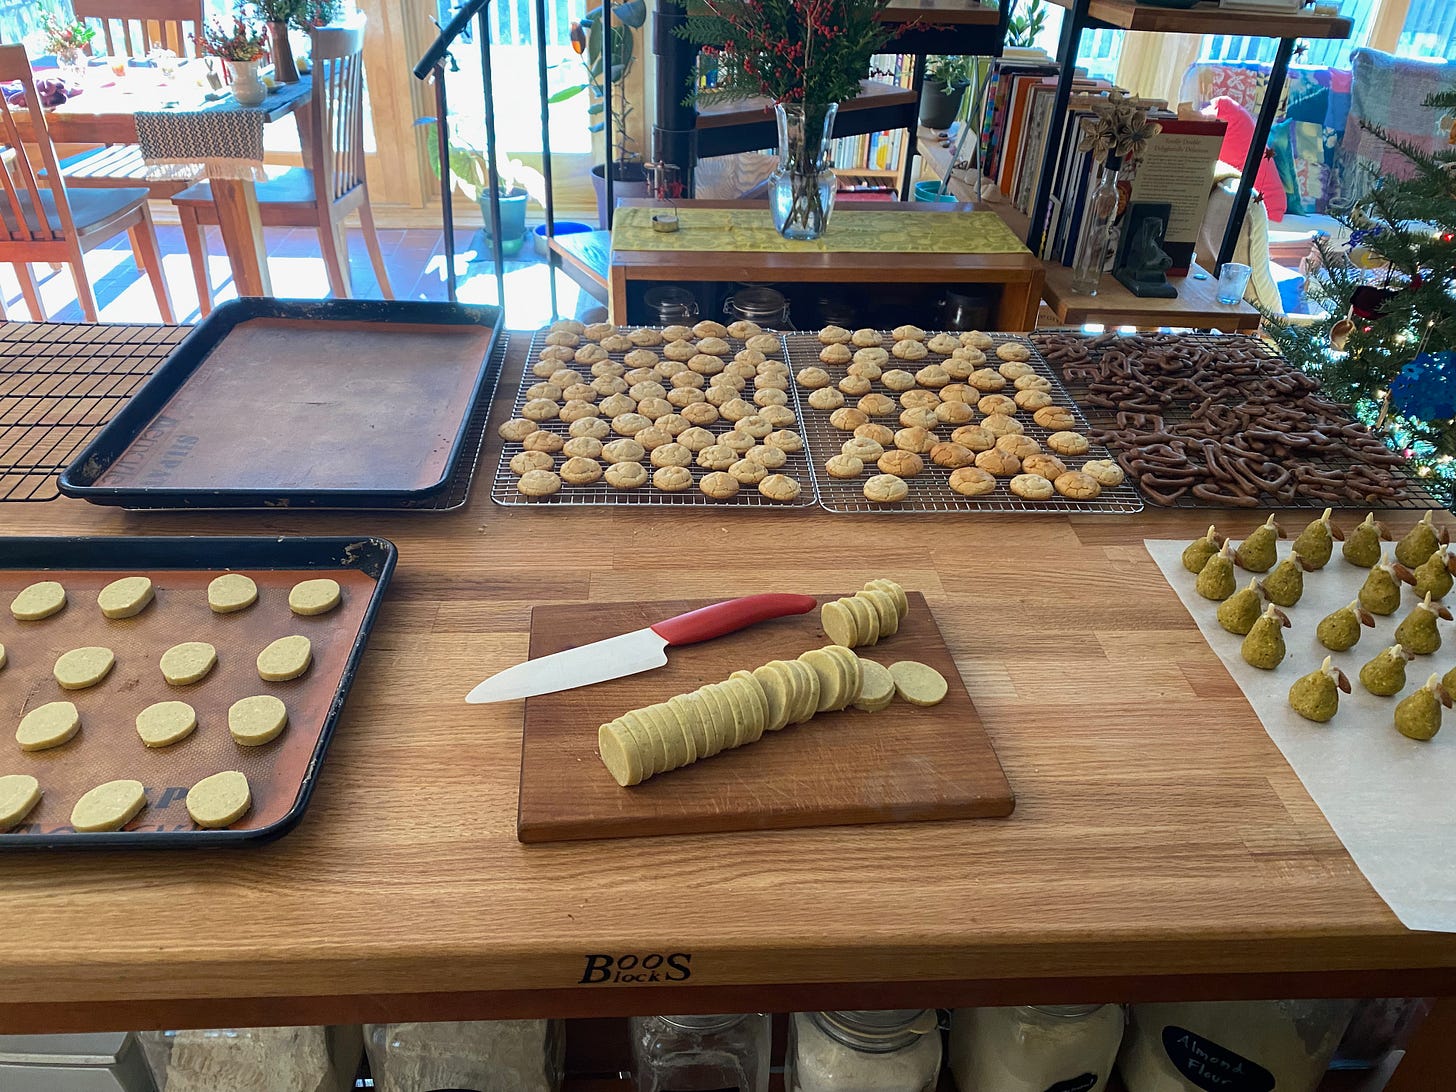 A sunlit kitchen island full of trays of cookies. There are small marzipan pears, a tray of cocoa alphabet cookies, two cooling racks full of small almonds cookies, an empty tray, and a log of sliced unbaked cookies with a knife on a cutting board.